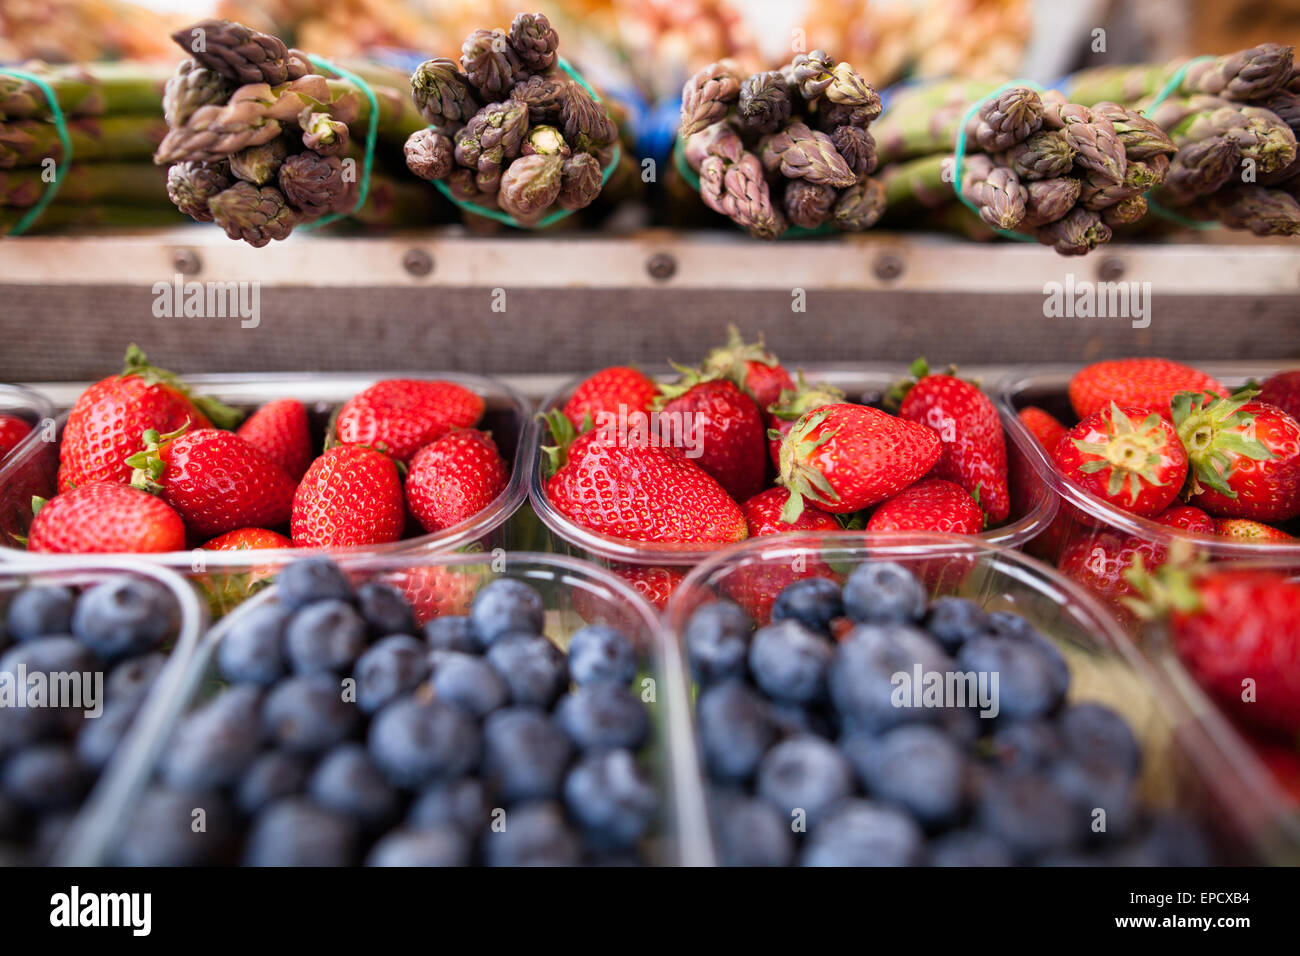 Beautiful fresh, ripe and delicious strawberries, blueberries and asparagus on a market stall Stock Photo